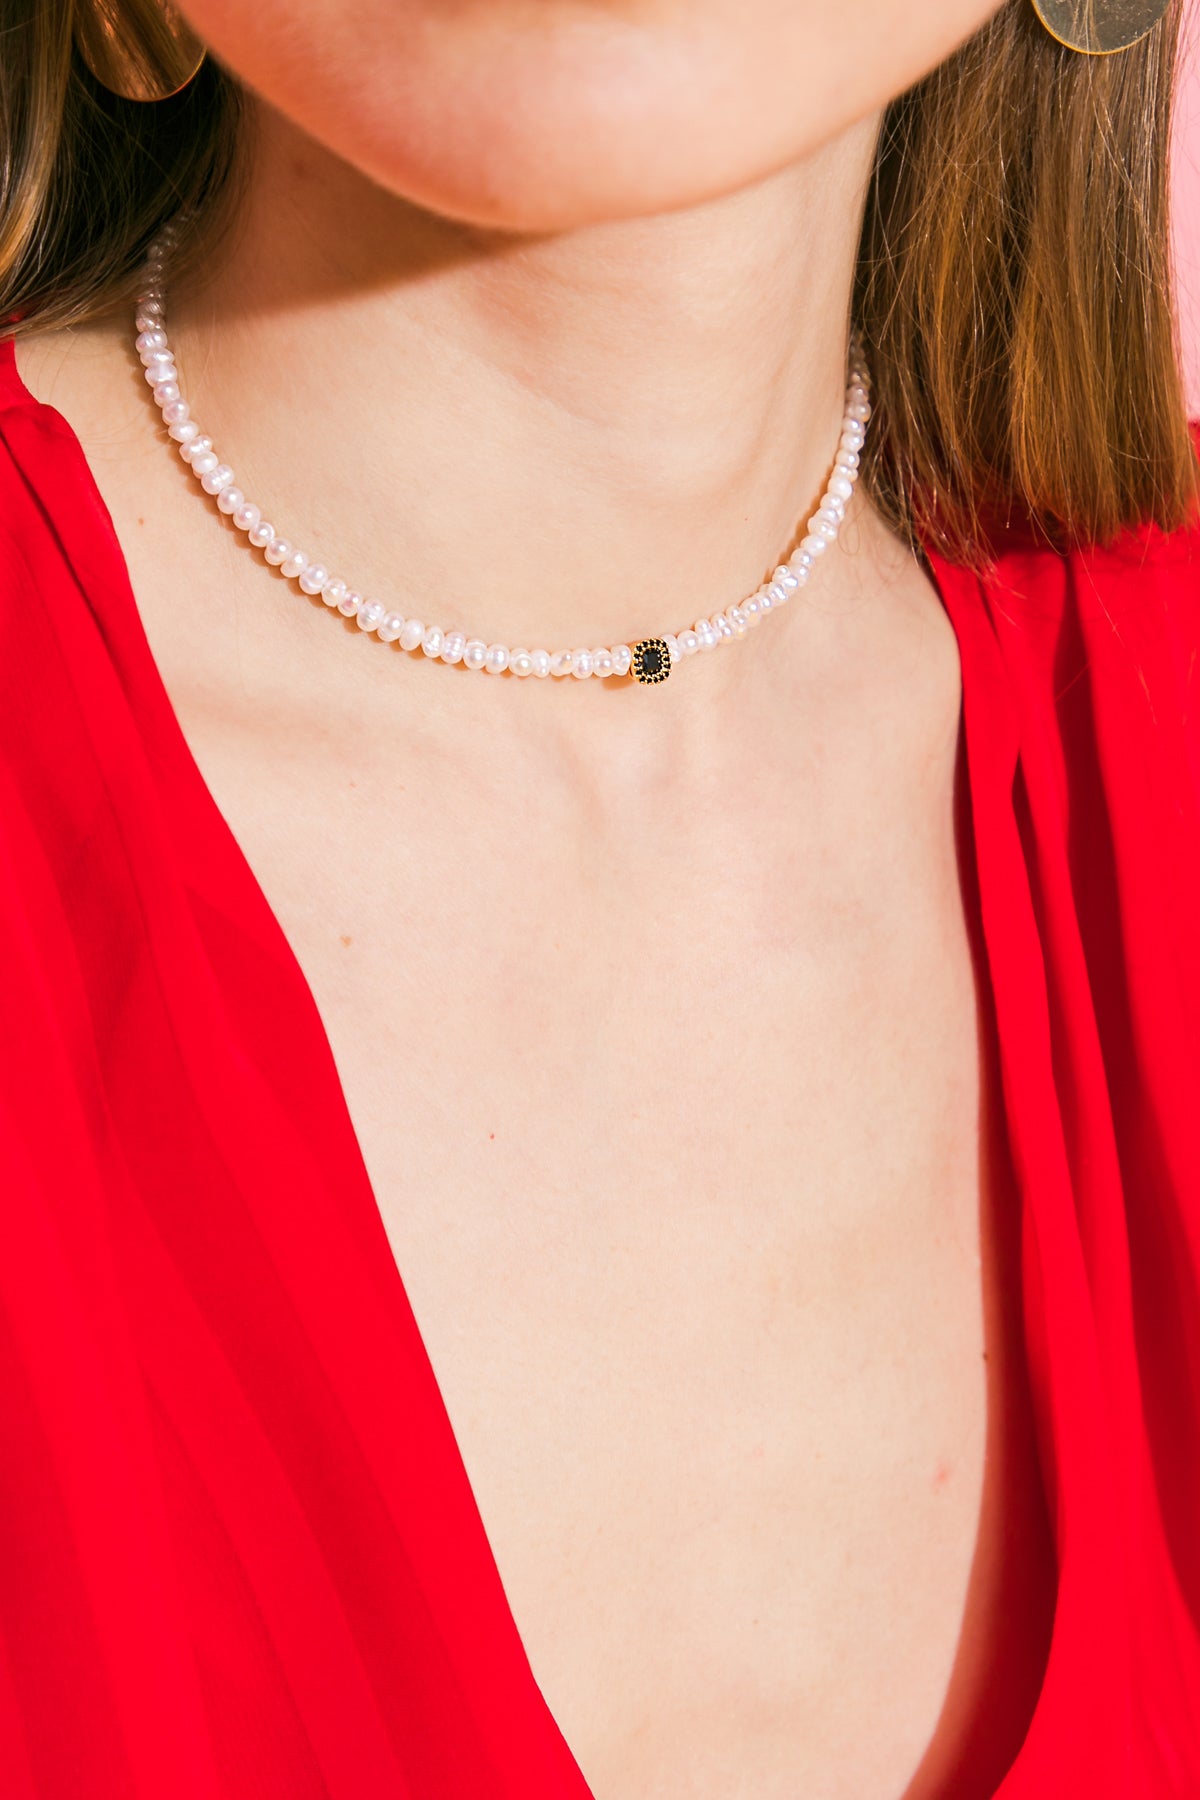 THE BOUNTY PEARL NECKLACE